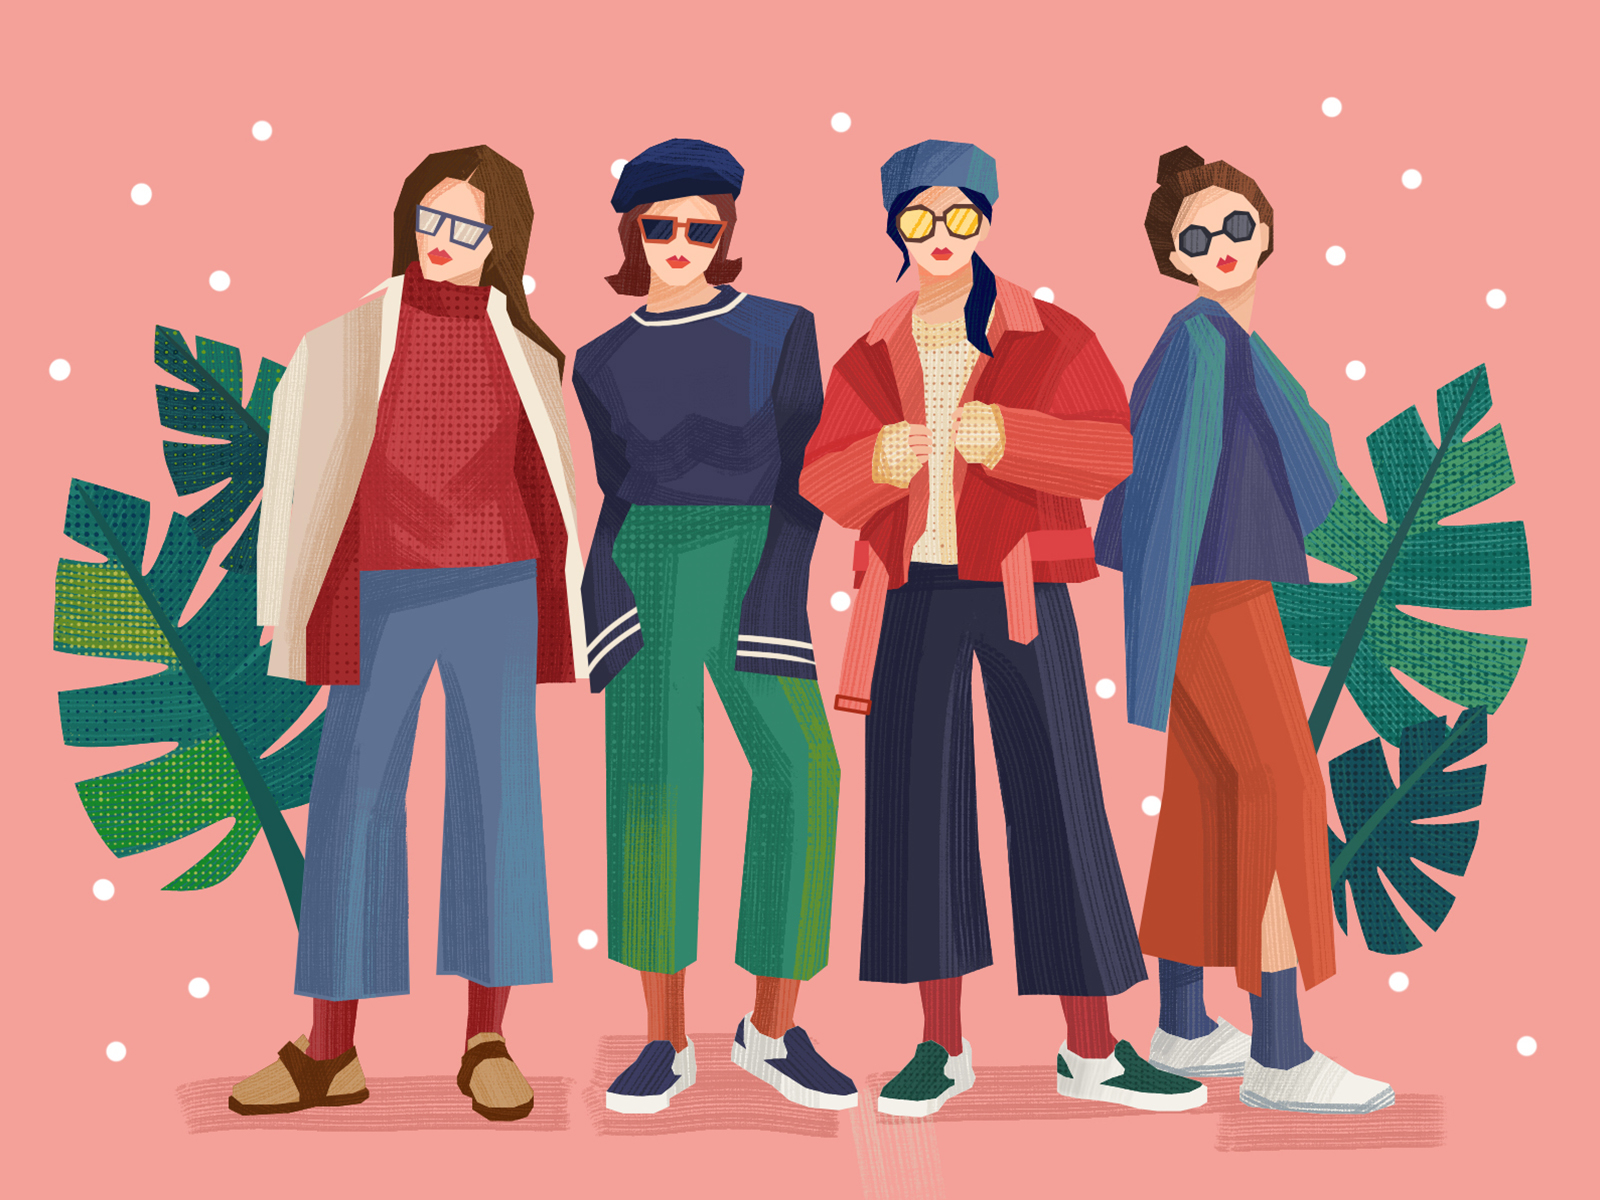 Girls in winter clothes by ZJR for AGT on Dribbble